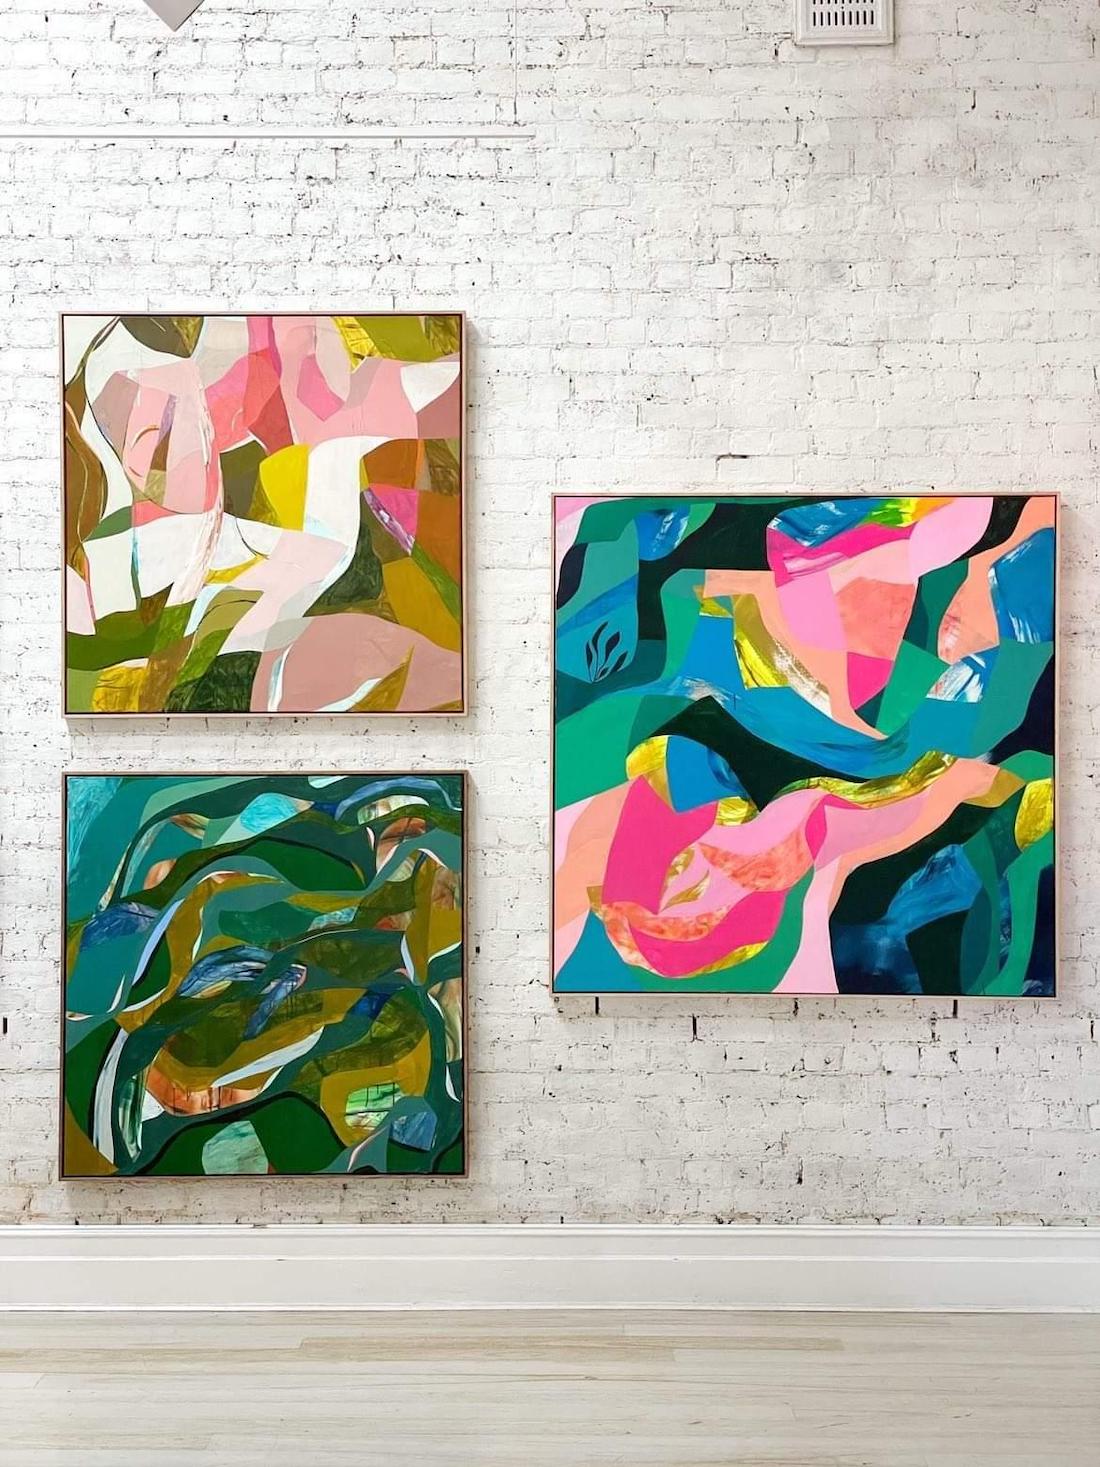 Coloured abstract paintings from Superabundance exhibition via Jumbled by Chris de Hoog